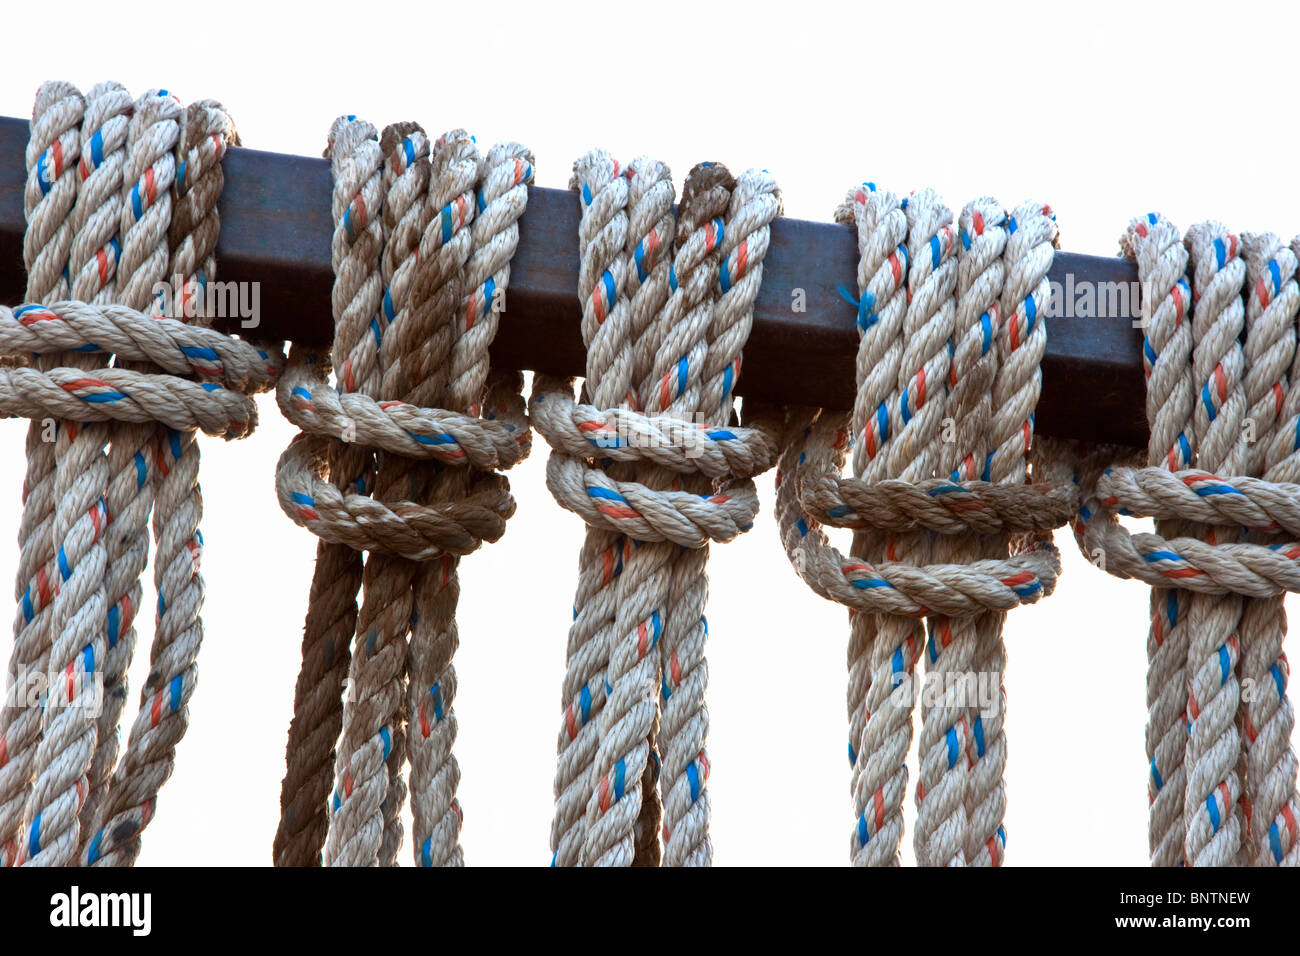 Reverse Lark's Head knots suspended from metal bar Stock Photo